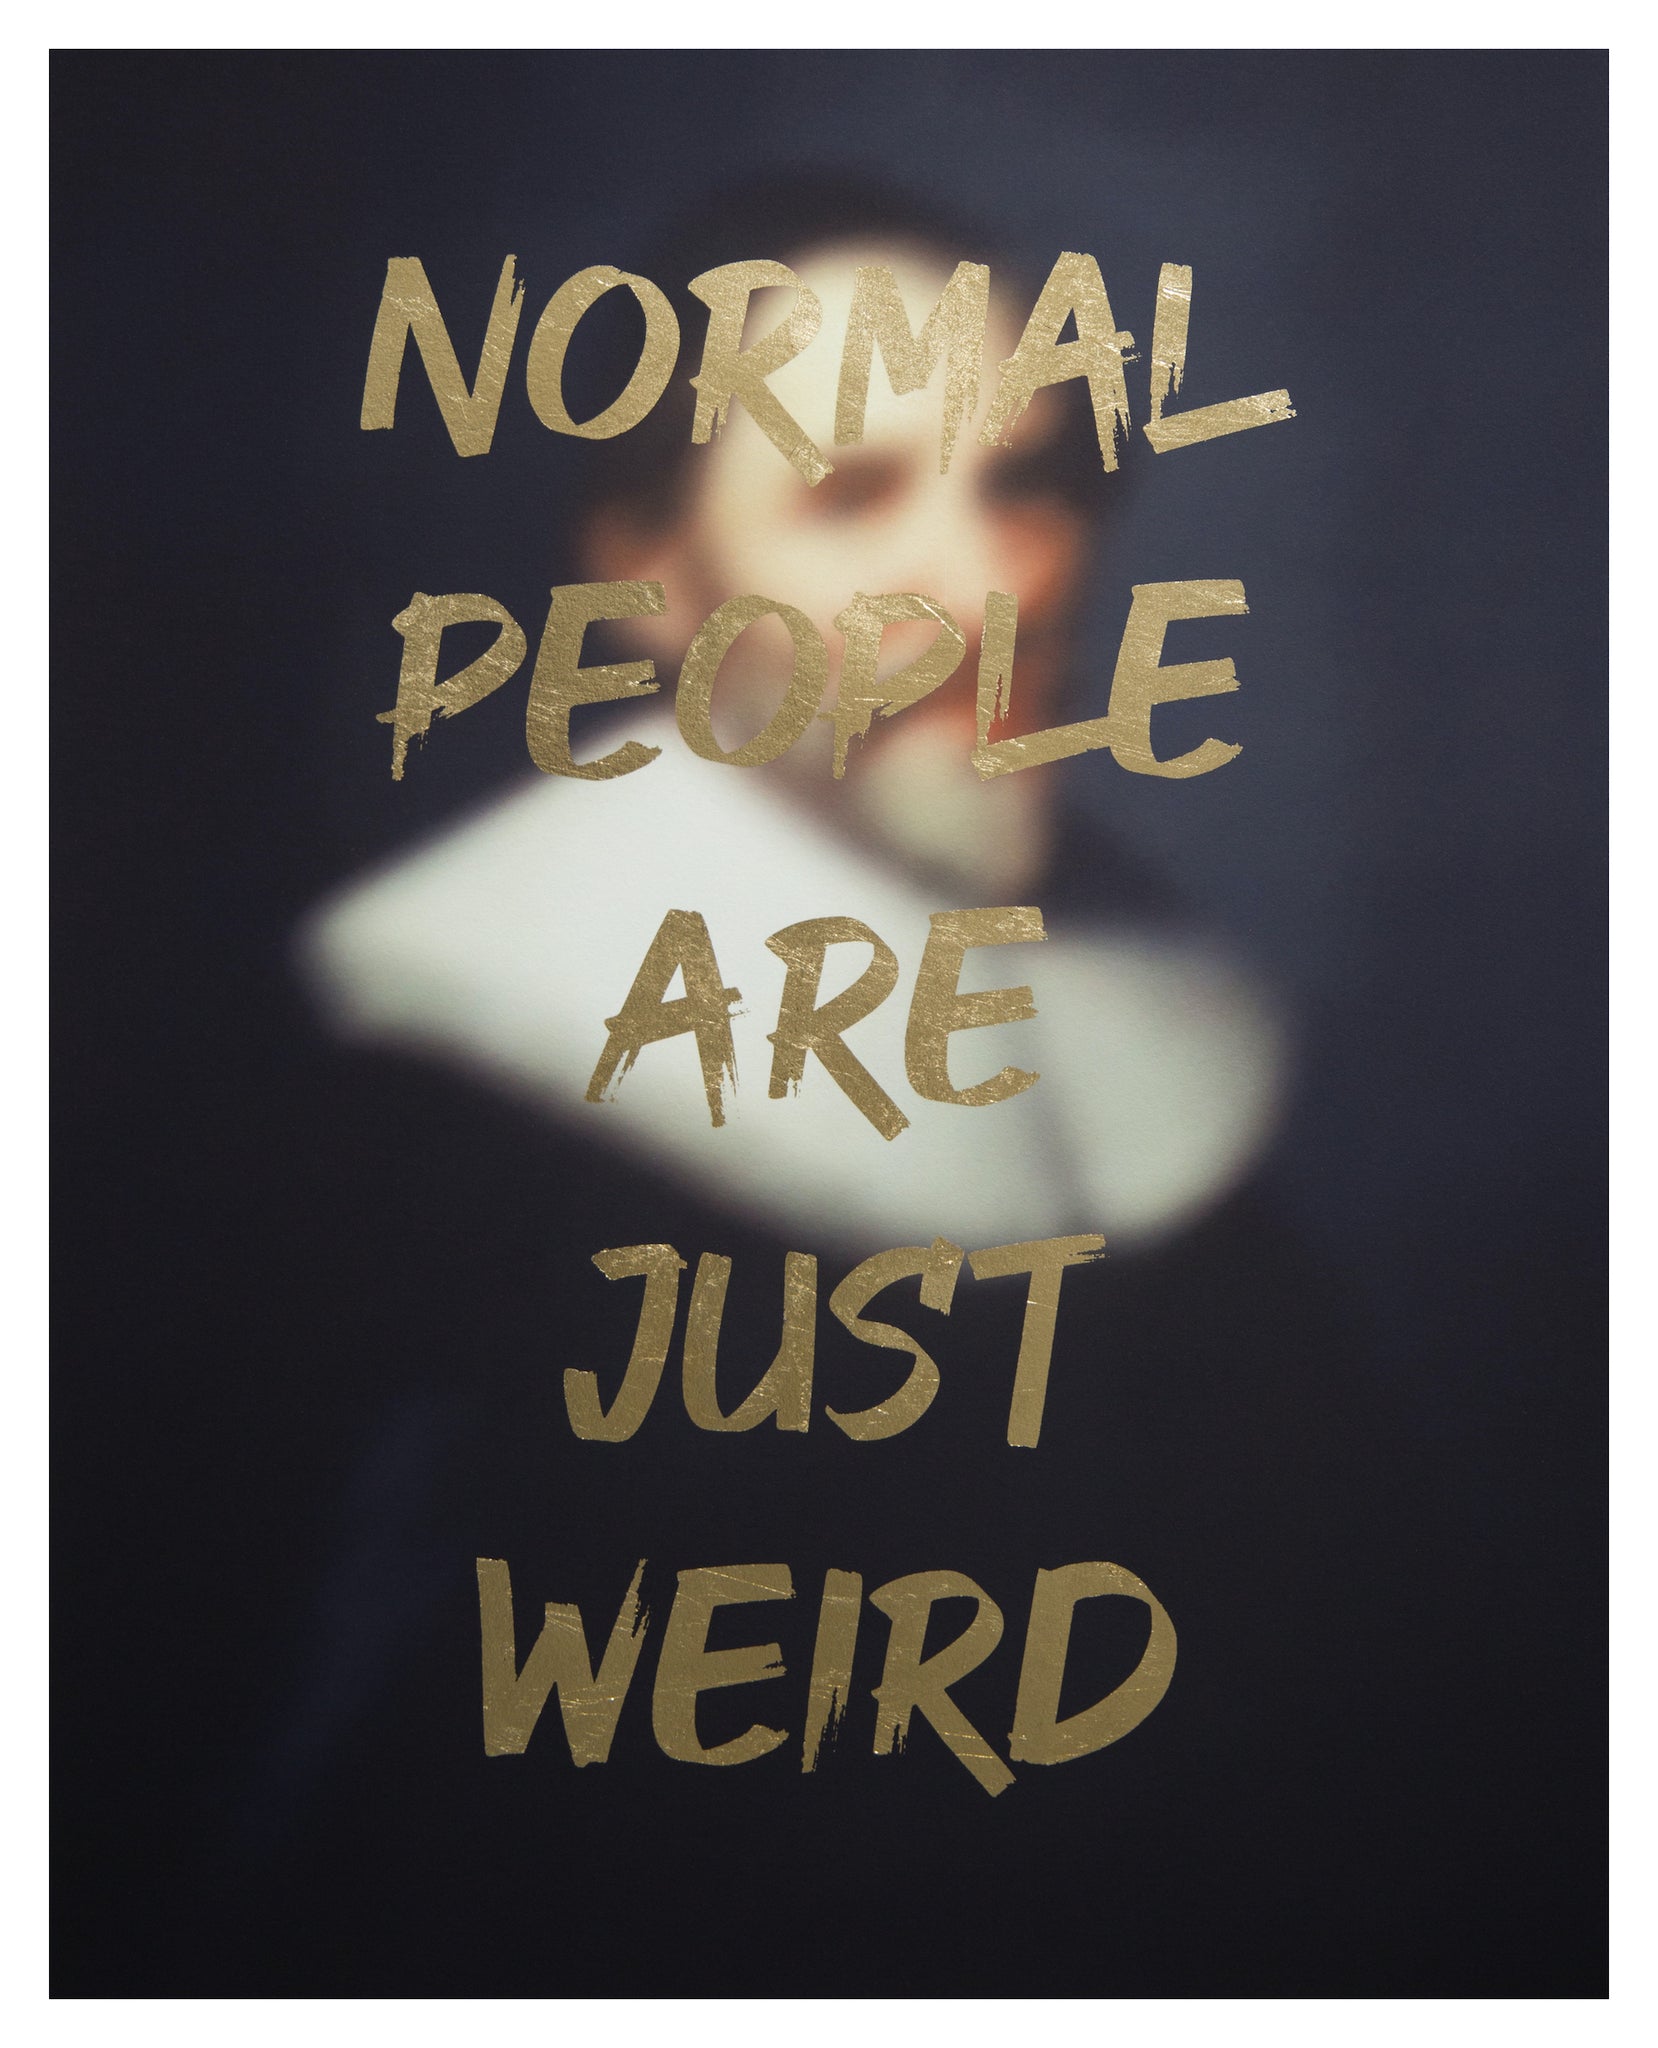 "NORMAL PEOPLE ARE JUST WEIRD" Limited Edition Hand Finished Print By AA Watson